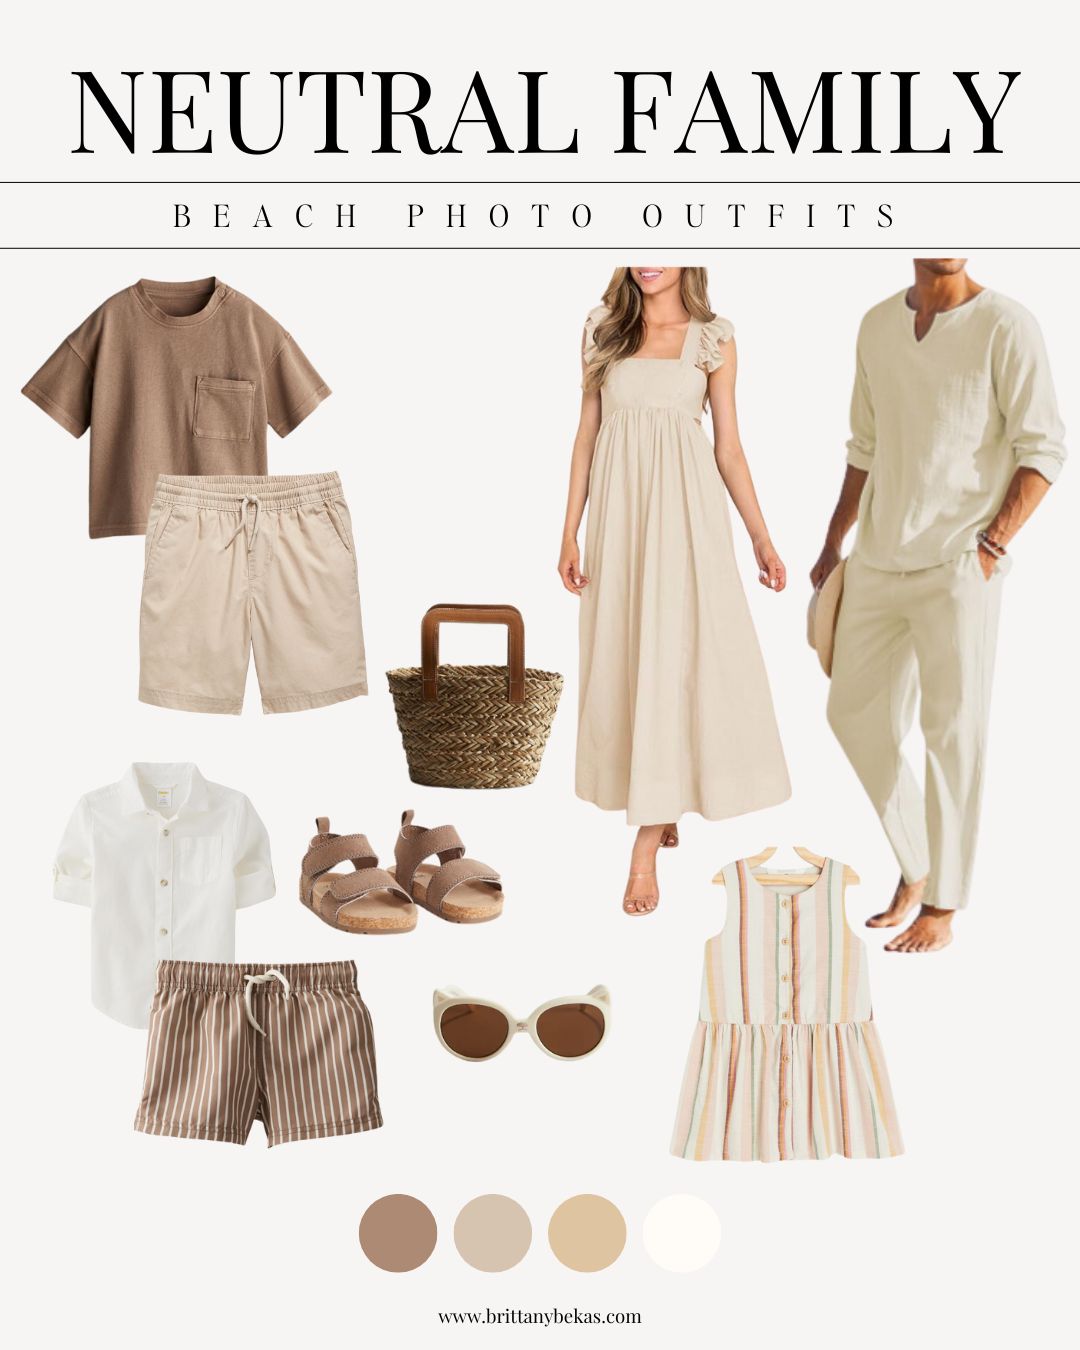 Neutral Beach Family Picture Outfits - Brittany Bekas39